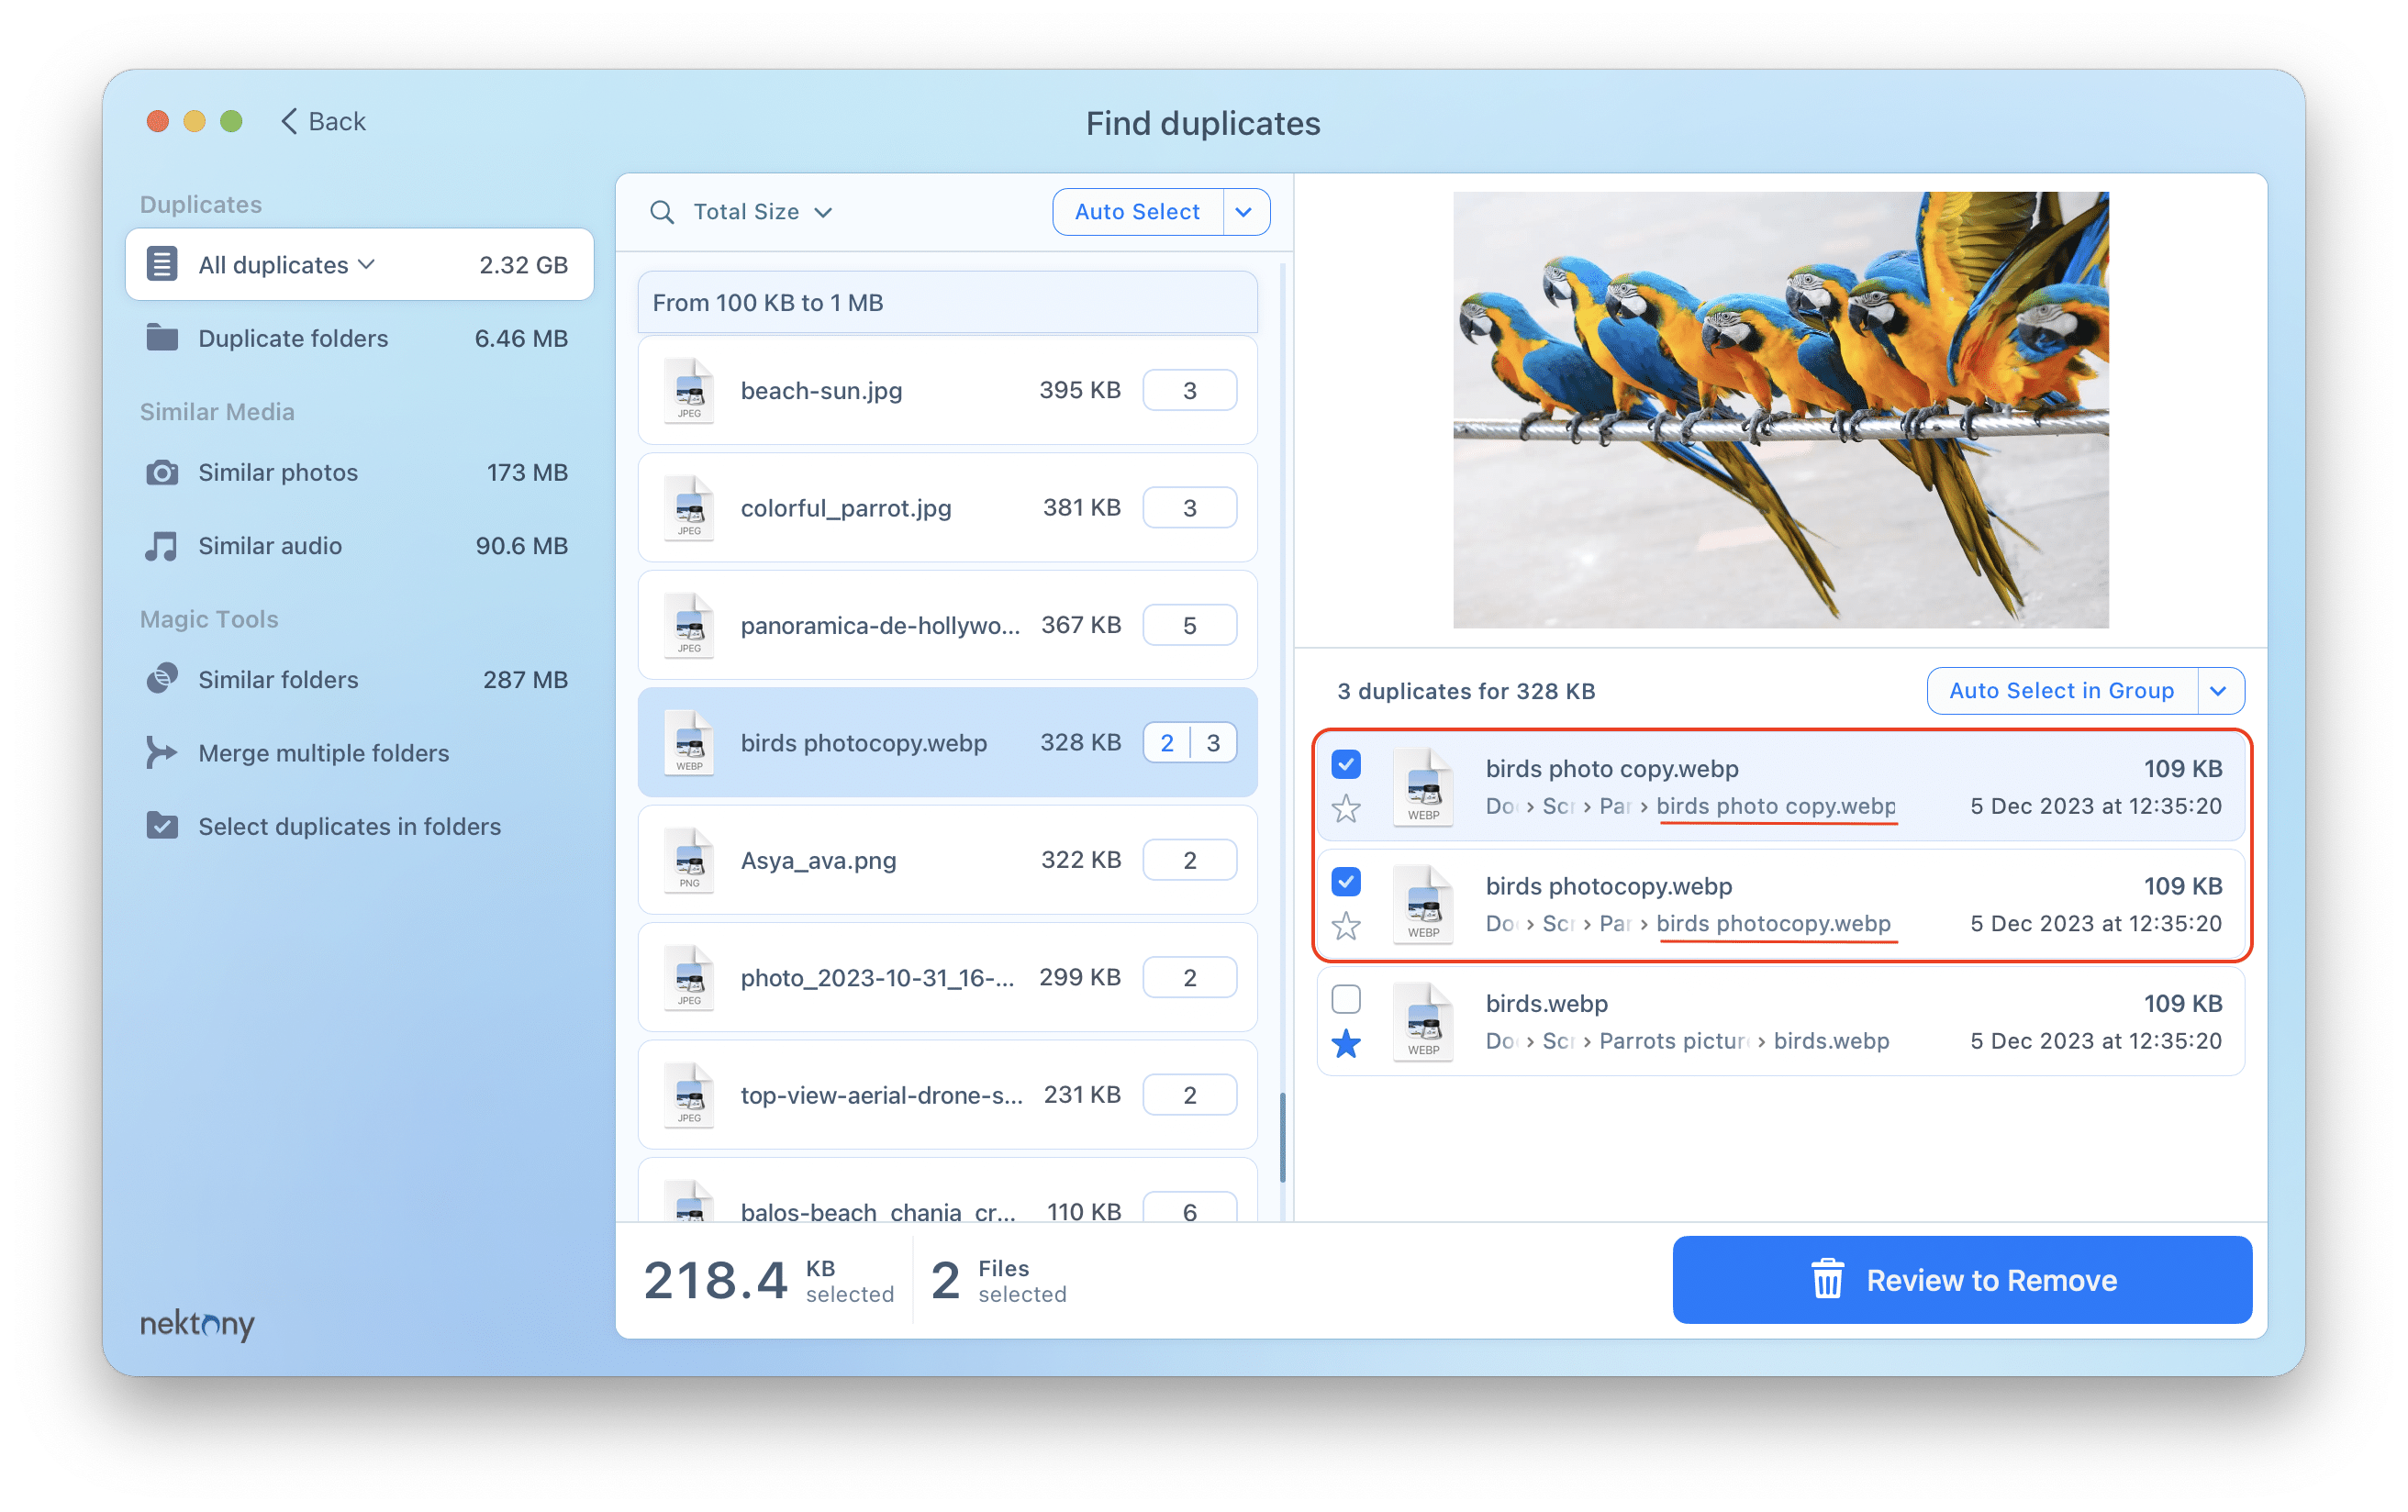 Duplicate File Finder showing selected files using the Uto Select button